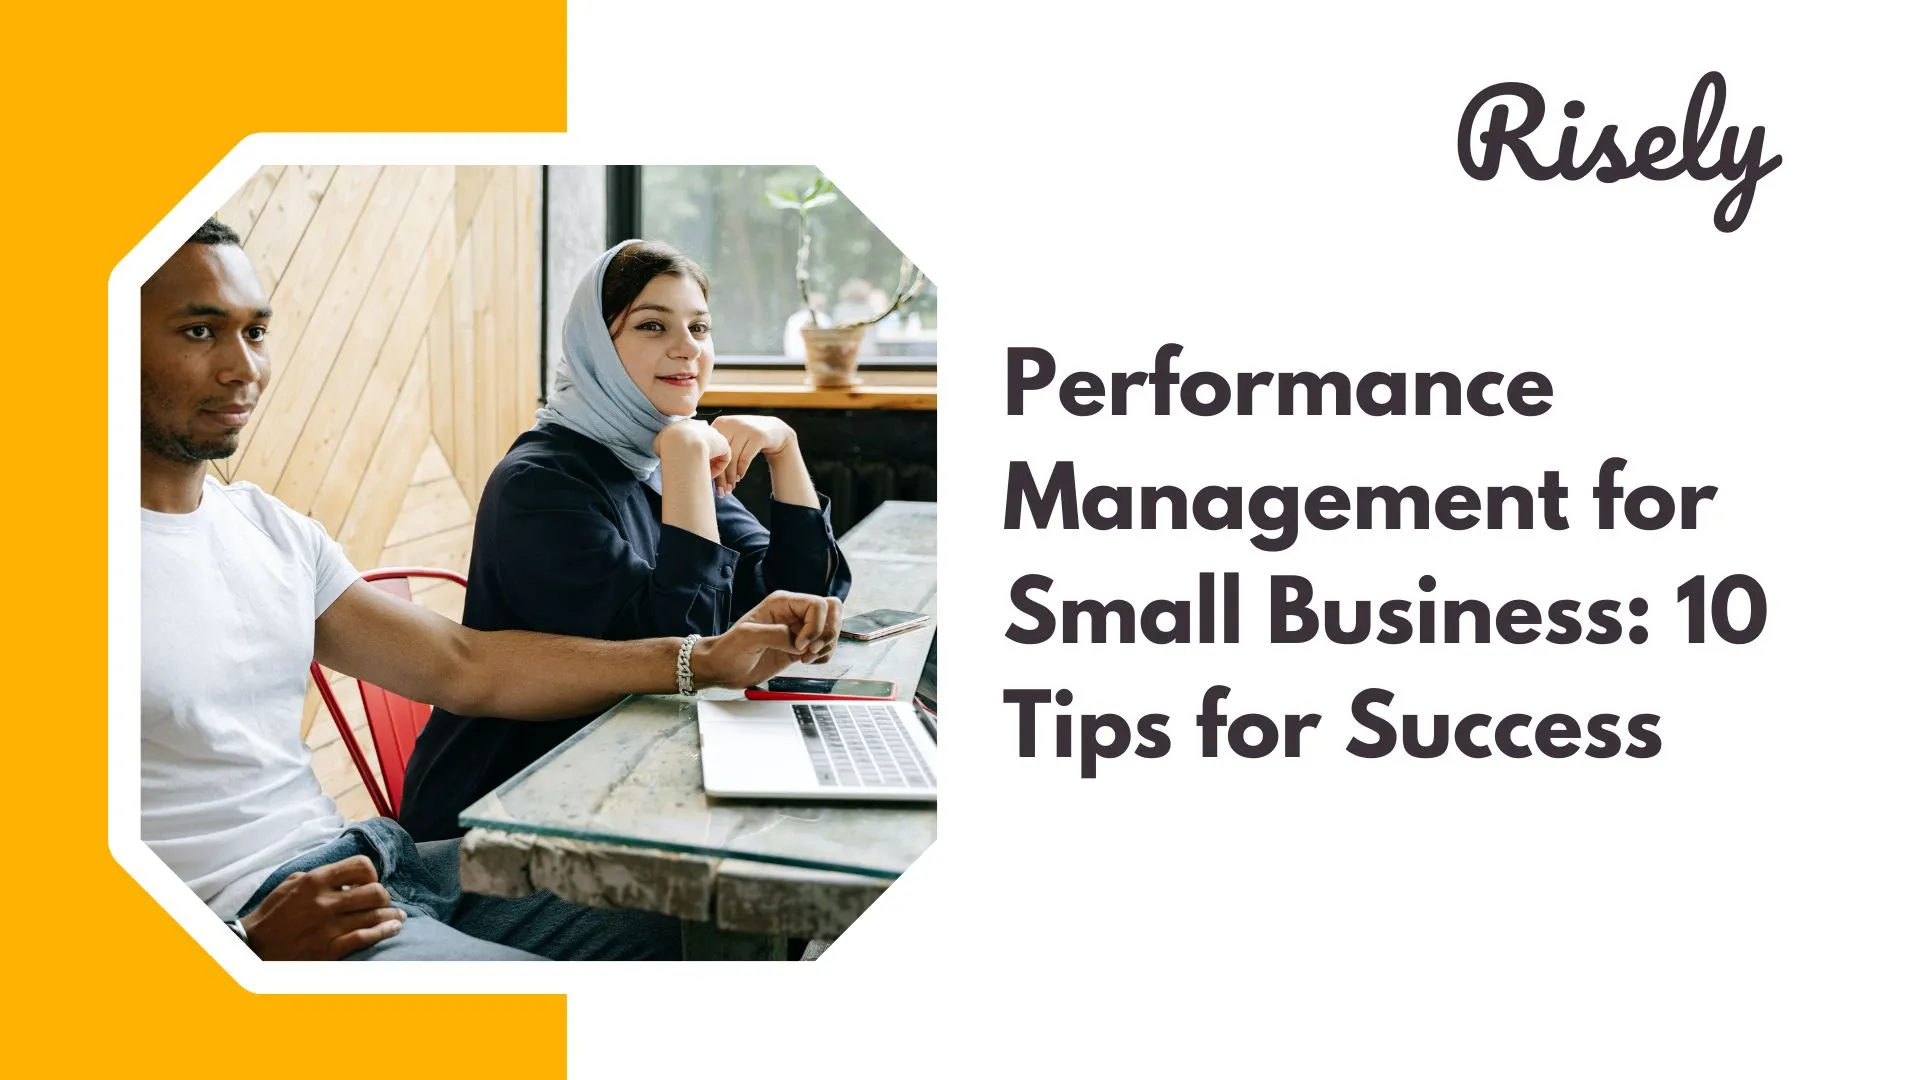 Performance Management for Small Business: 10 Tips for Success